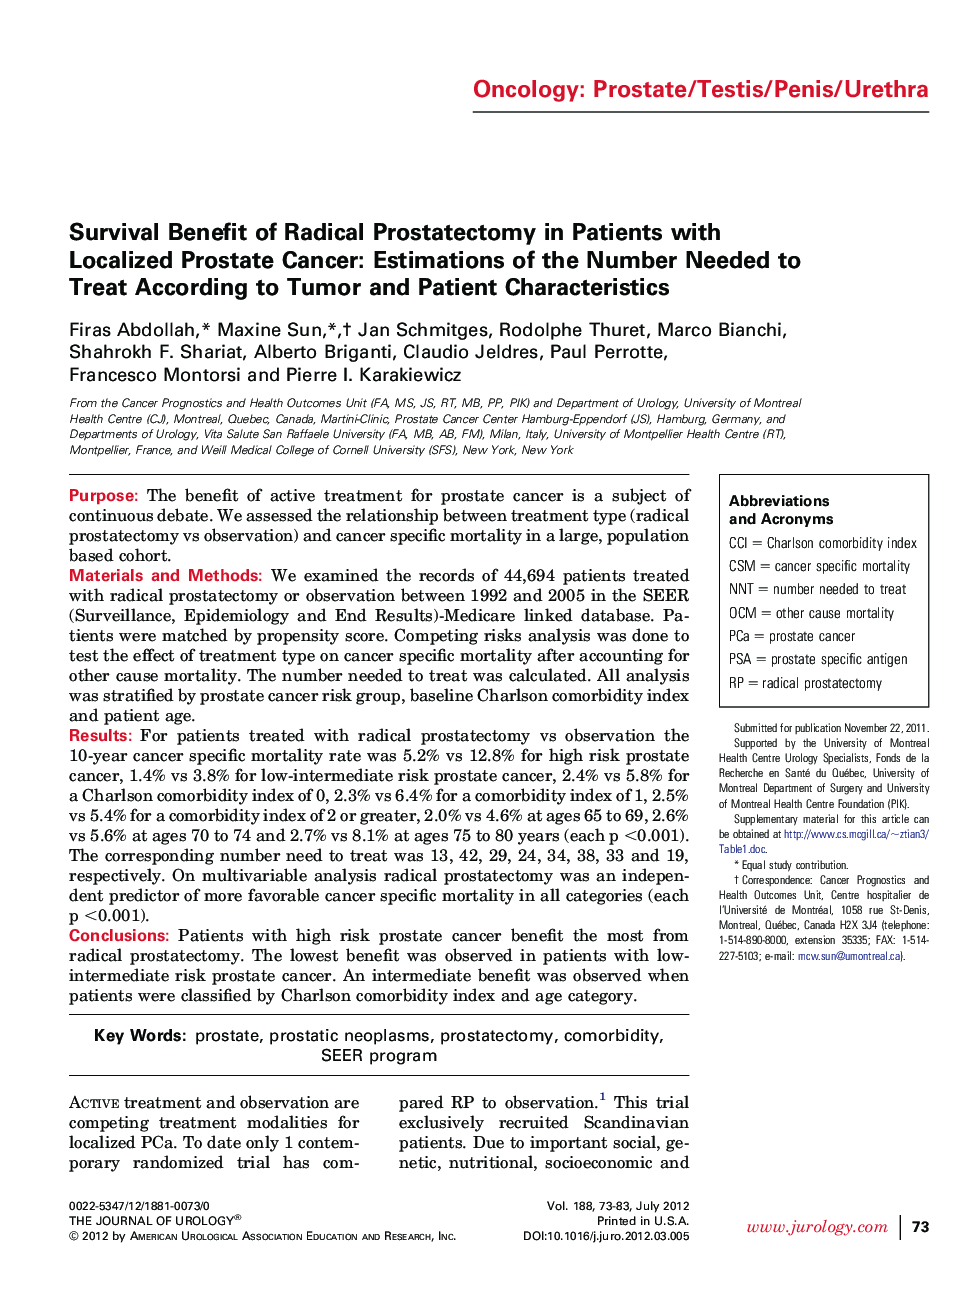 Survival Benefit of Radical Prostatectomy in Patients with Localized Prostate Cancer: Estimations of the Number Needed to Treat According to Tumor and Patient Characteristics 